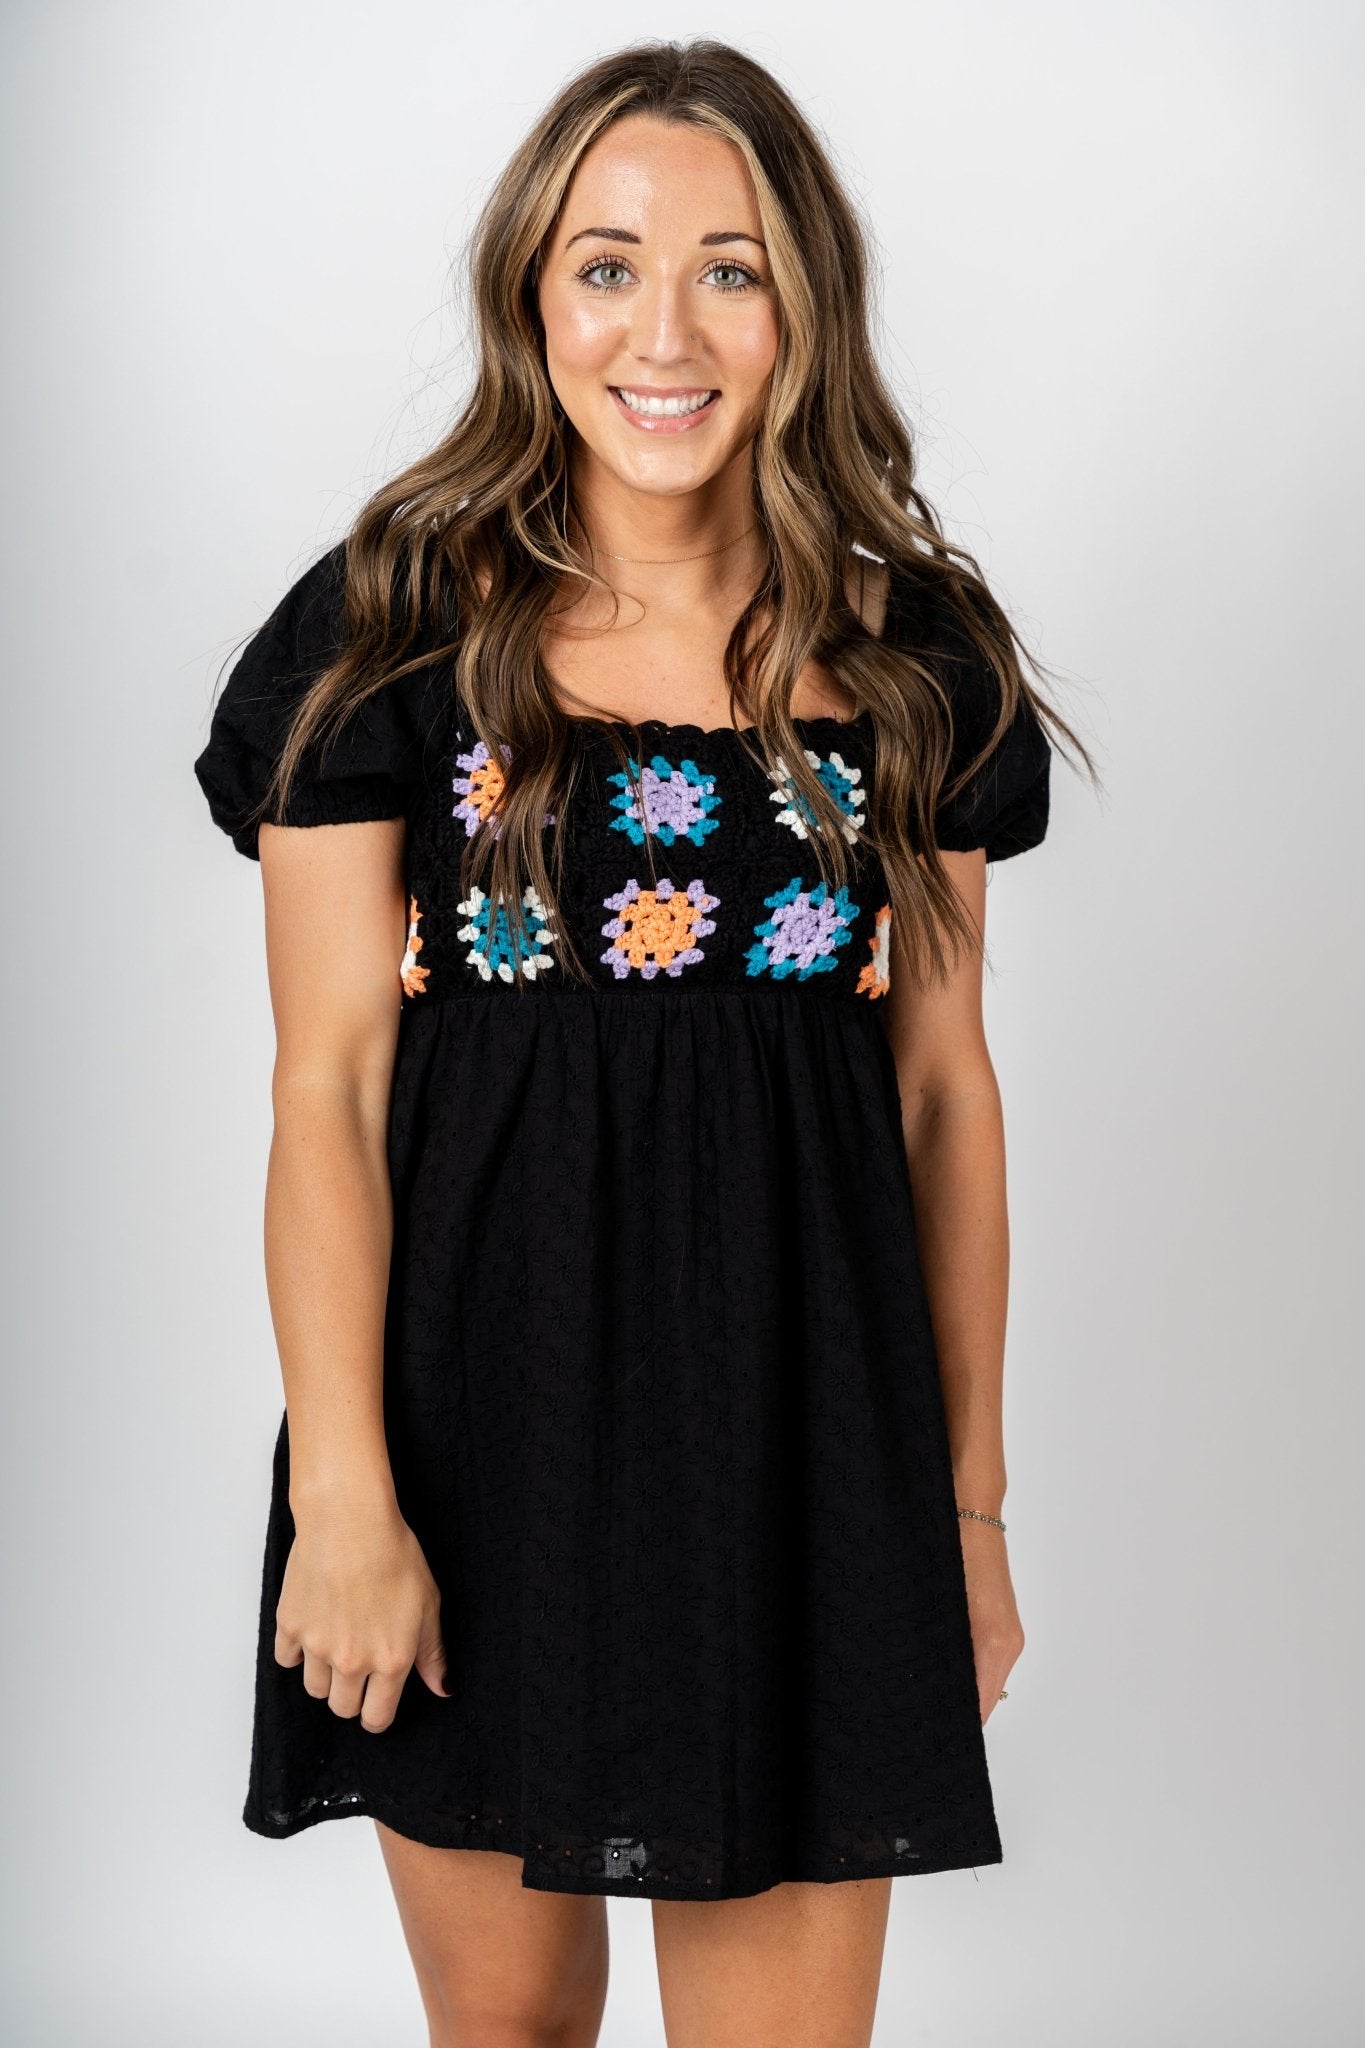 Crochet babydoll dress black - Affordable Dresses - Boutique Dresses at Lush Fashion Lounge Boutique in Oklahoma City